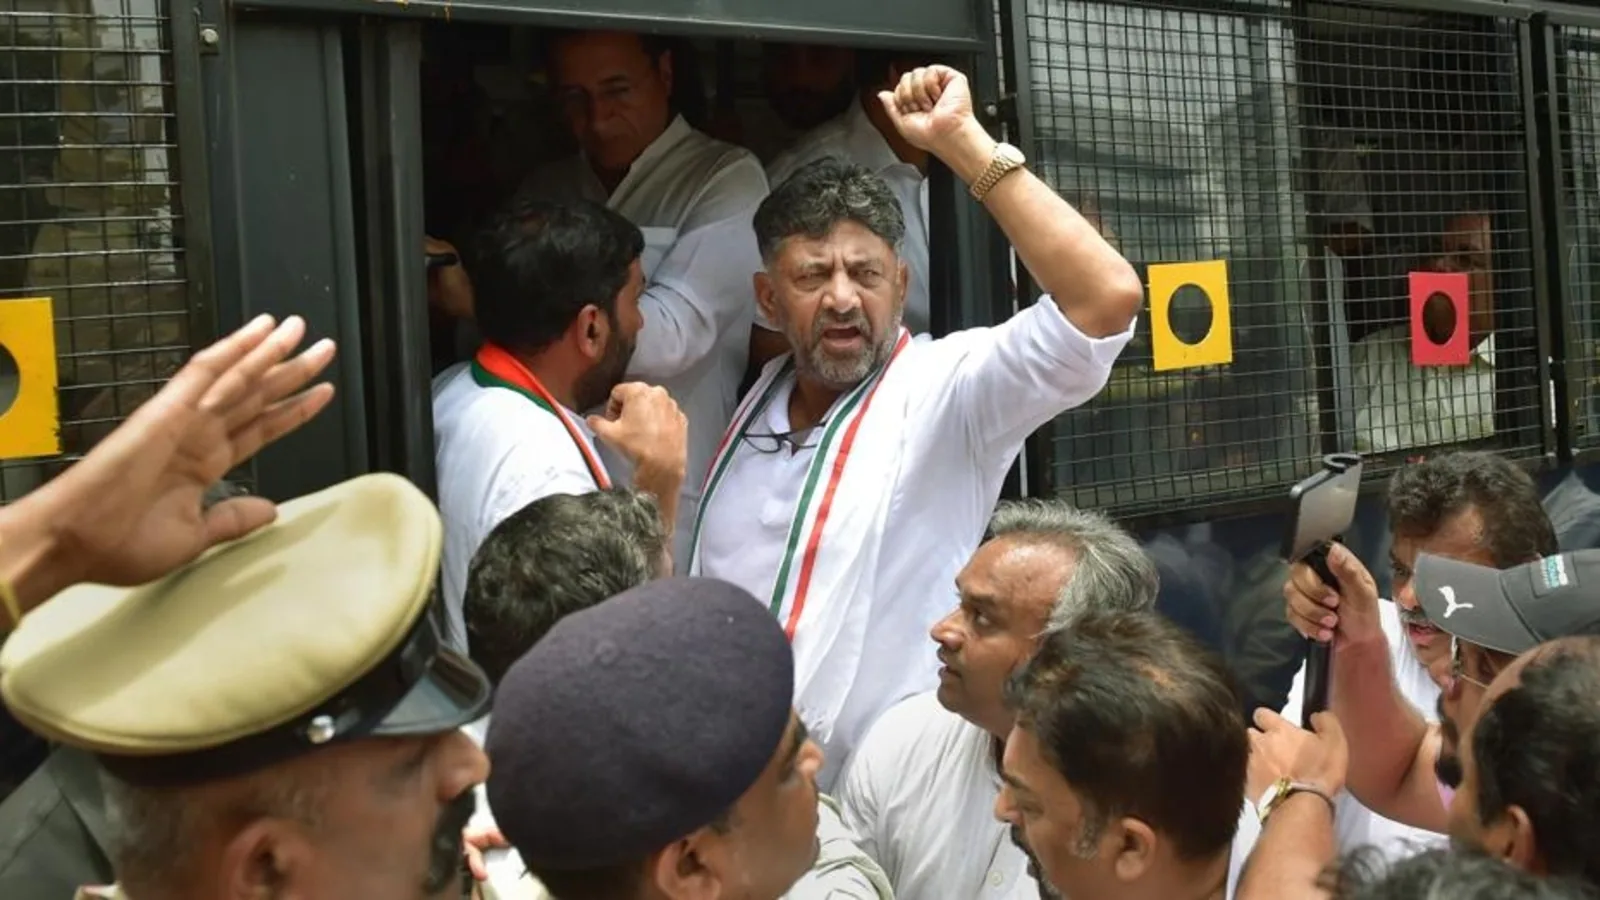 FIR in Karnataka against top Congress leaders over protest at CM Bommai’s home